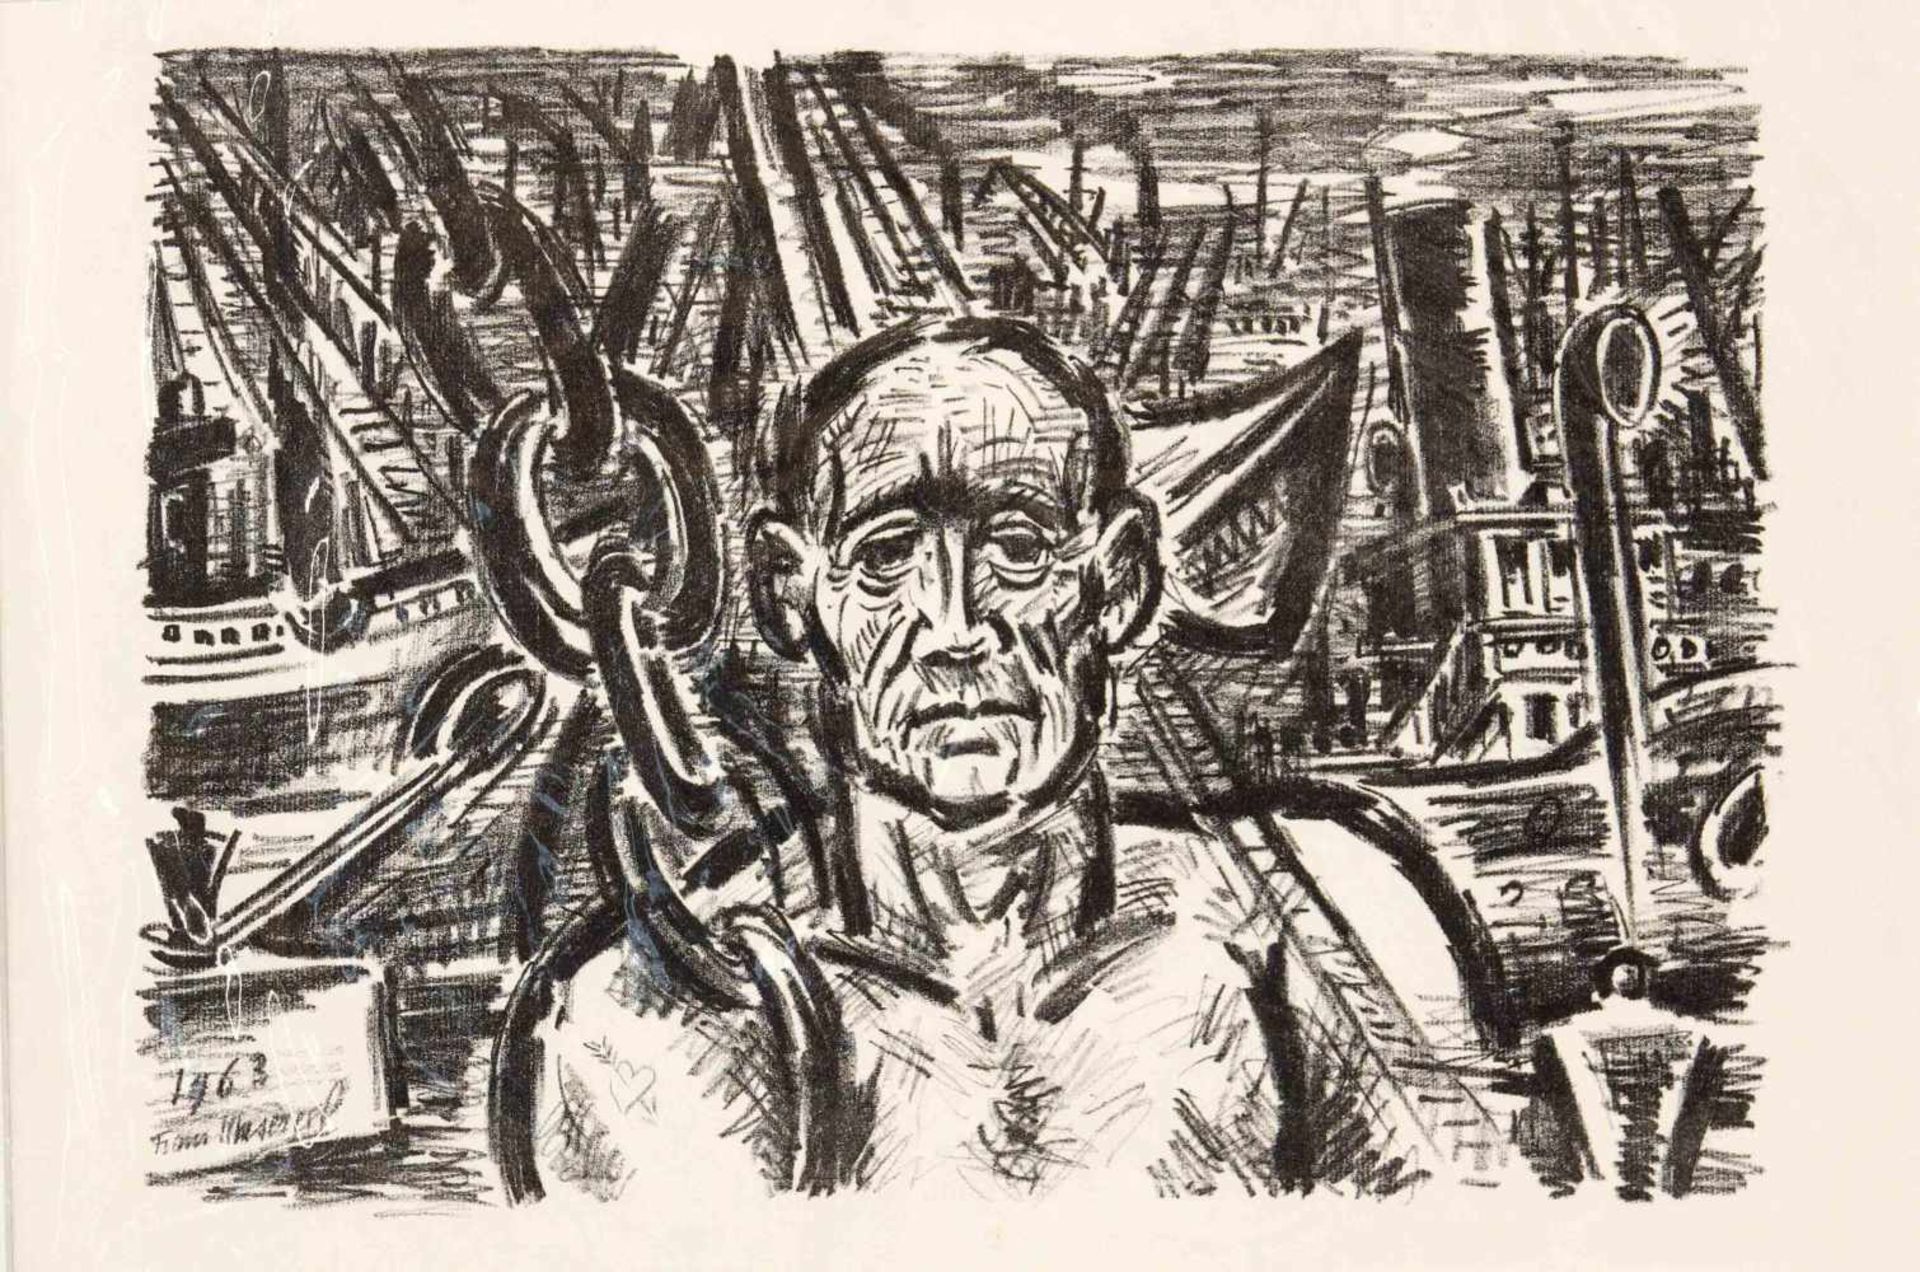 Frans Masereel (1889-1972), dock worker, lithograph, u. left signed in stone u. dated1963, 31 x 45